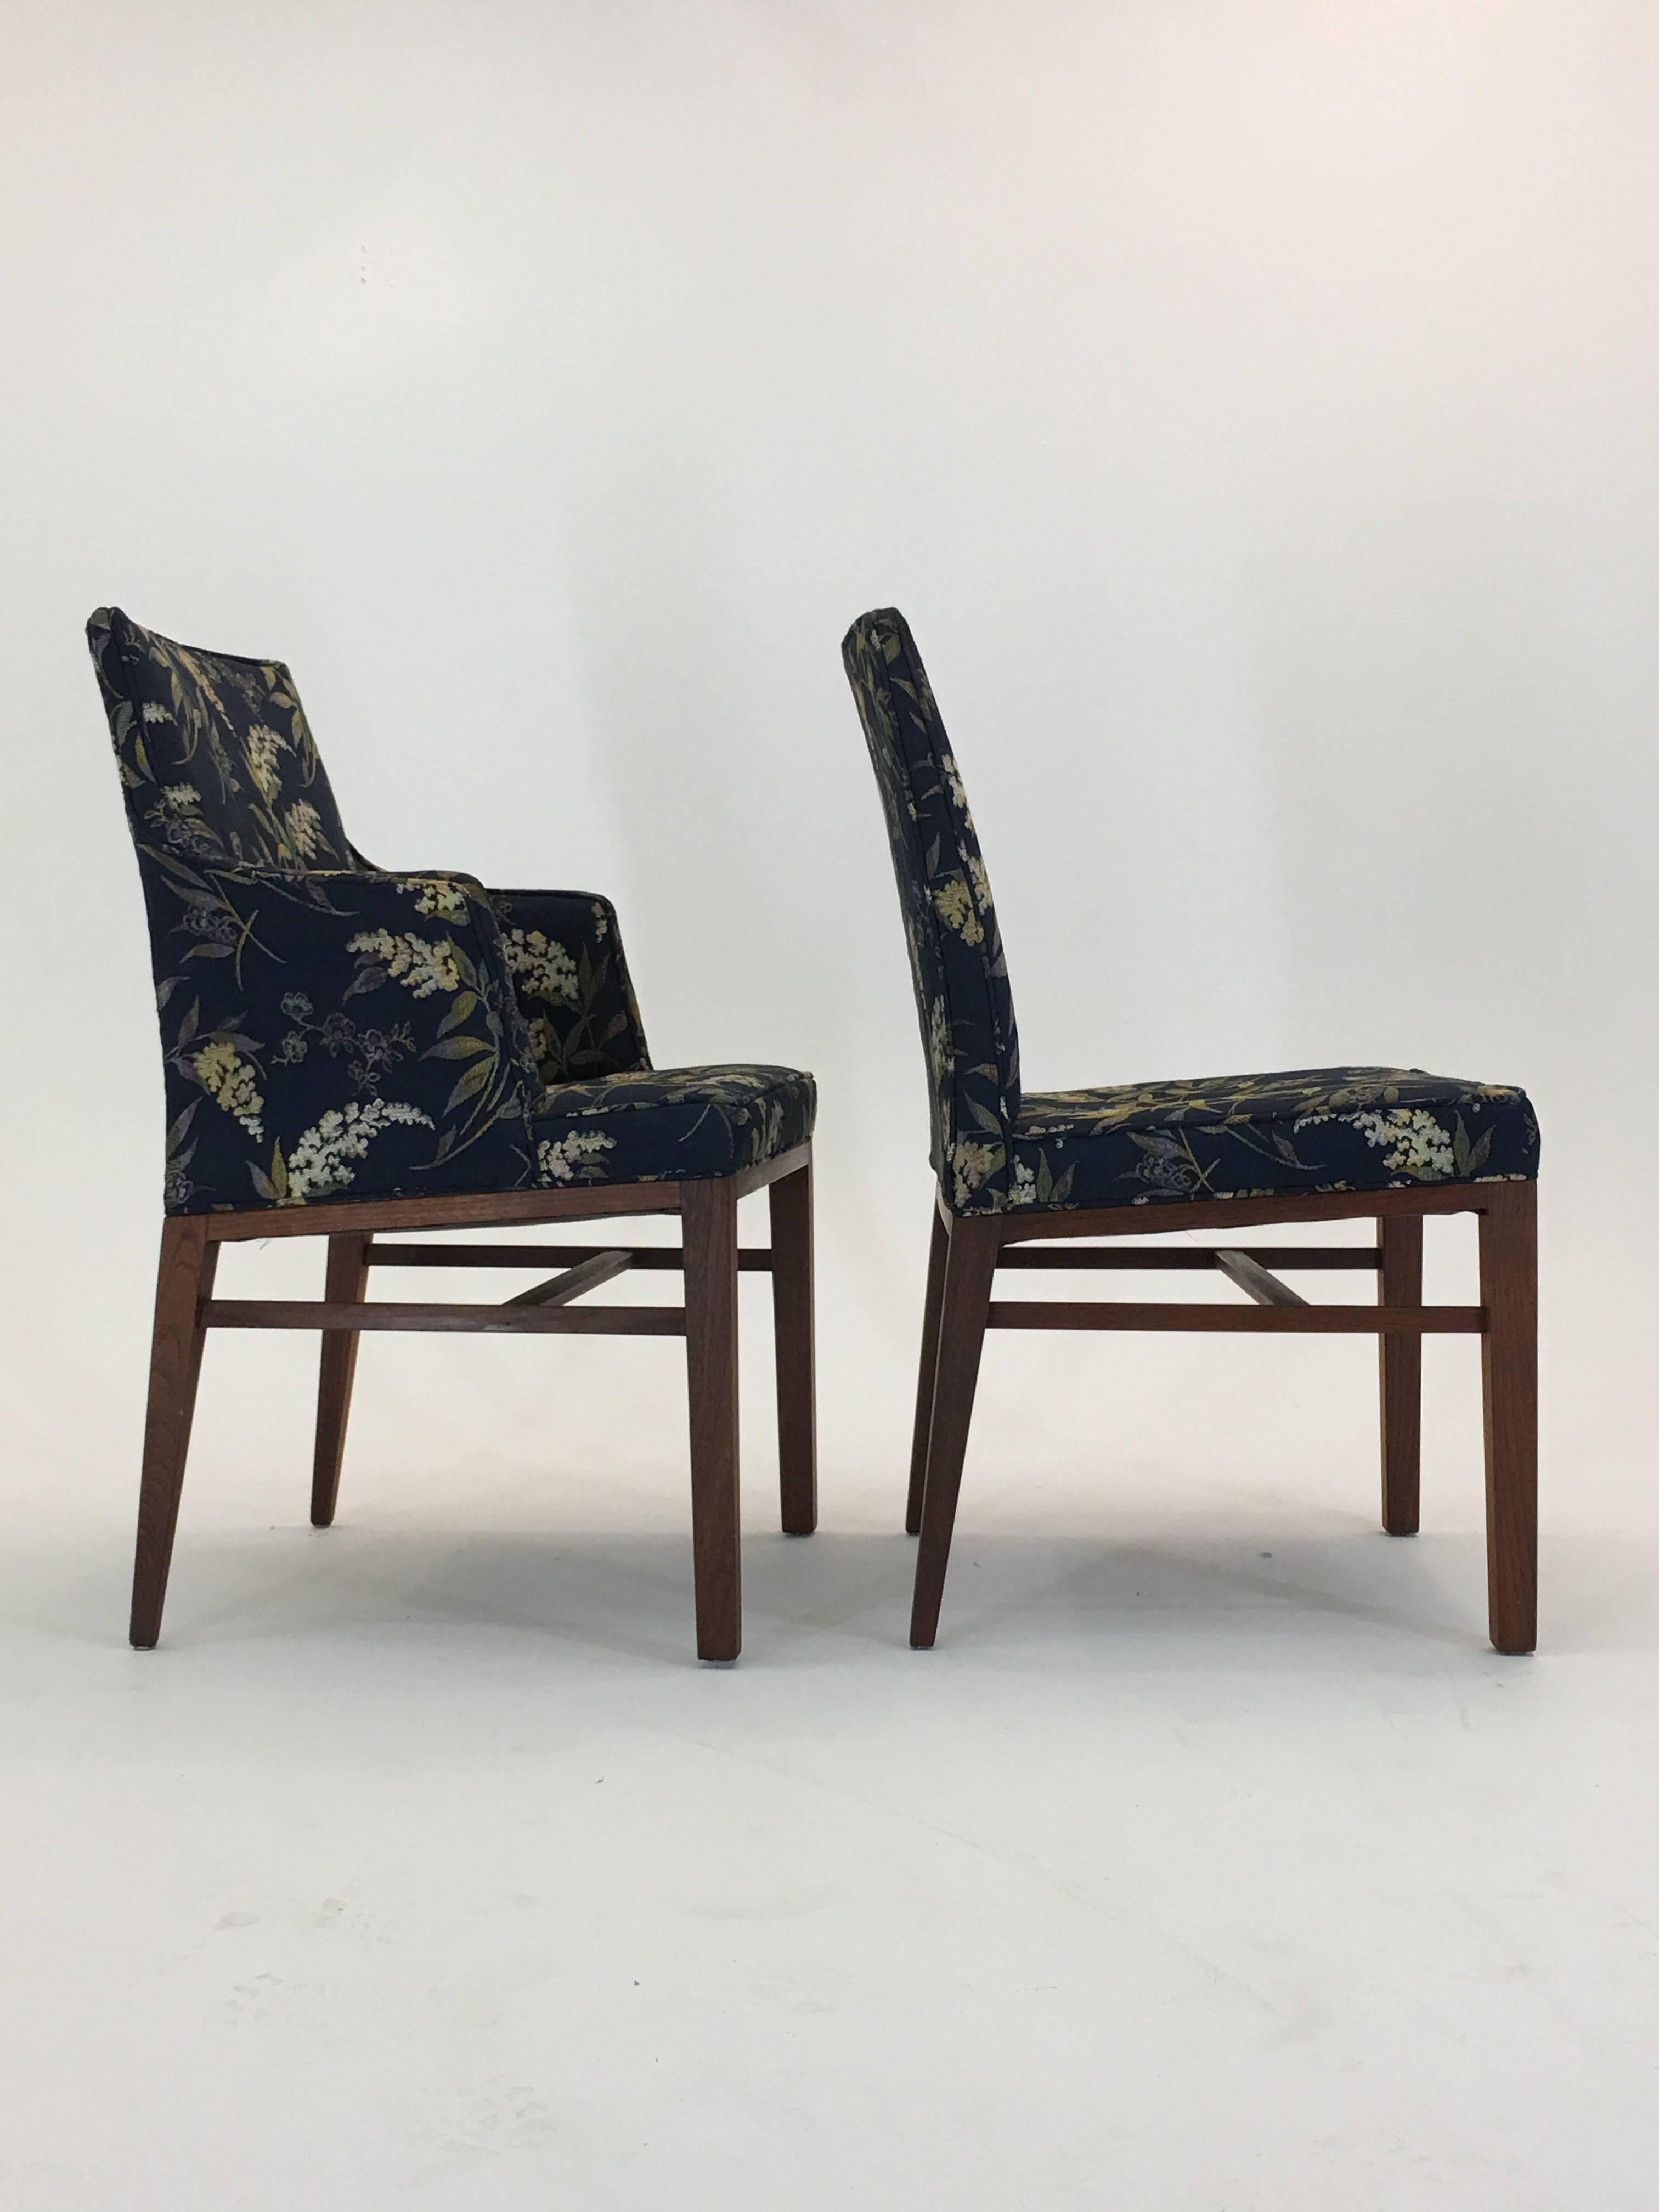 Two armchairs, model 454 and six side chairs, model 453. Each chair measures 22" wide, 23" deep and 34.5" tall, approximately 18" seat height; however the arms of the arm chairs flare a little out giving a bit more